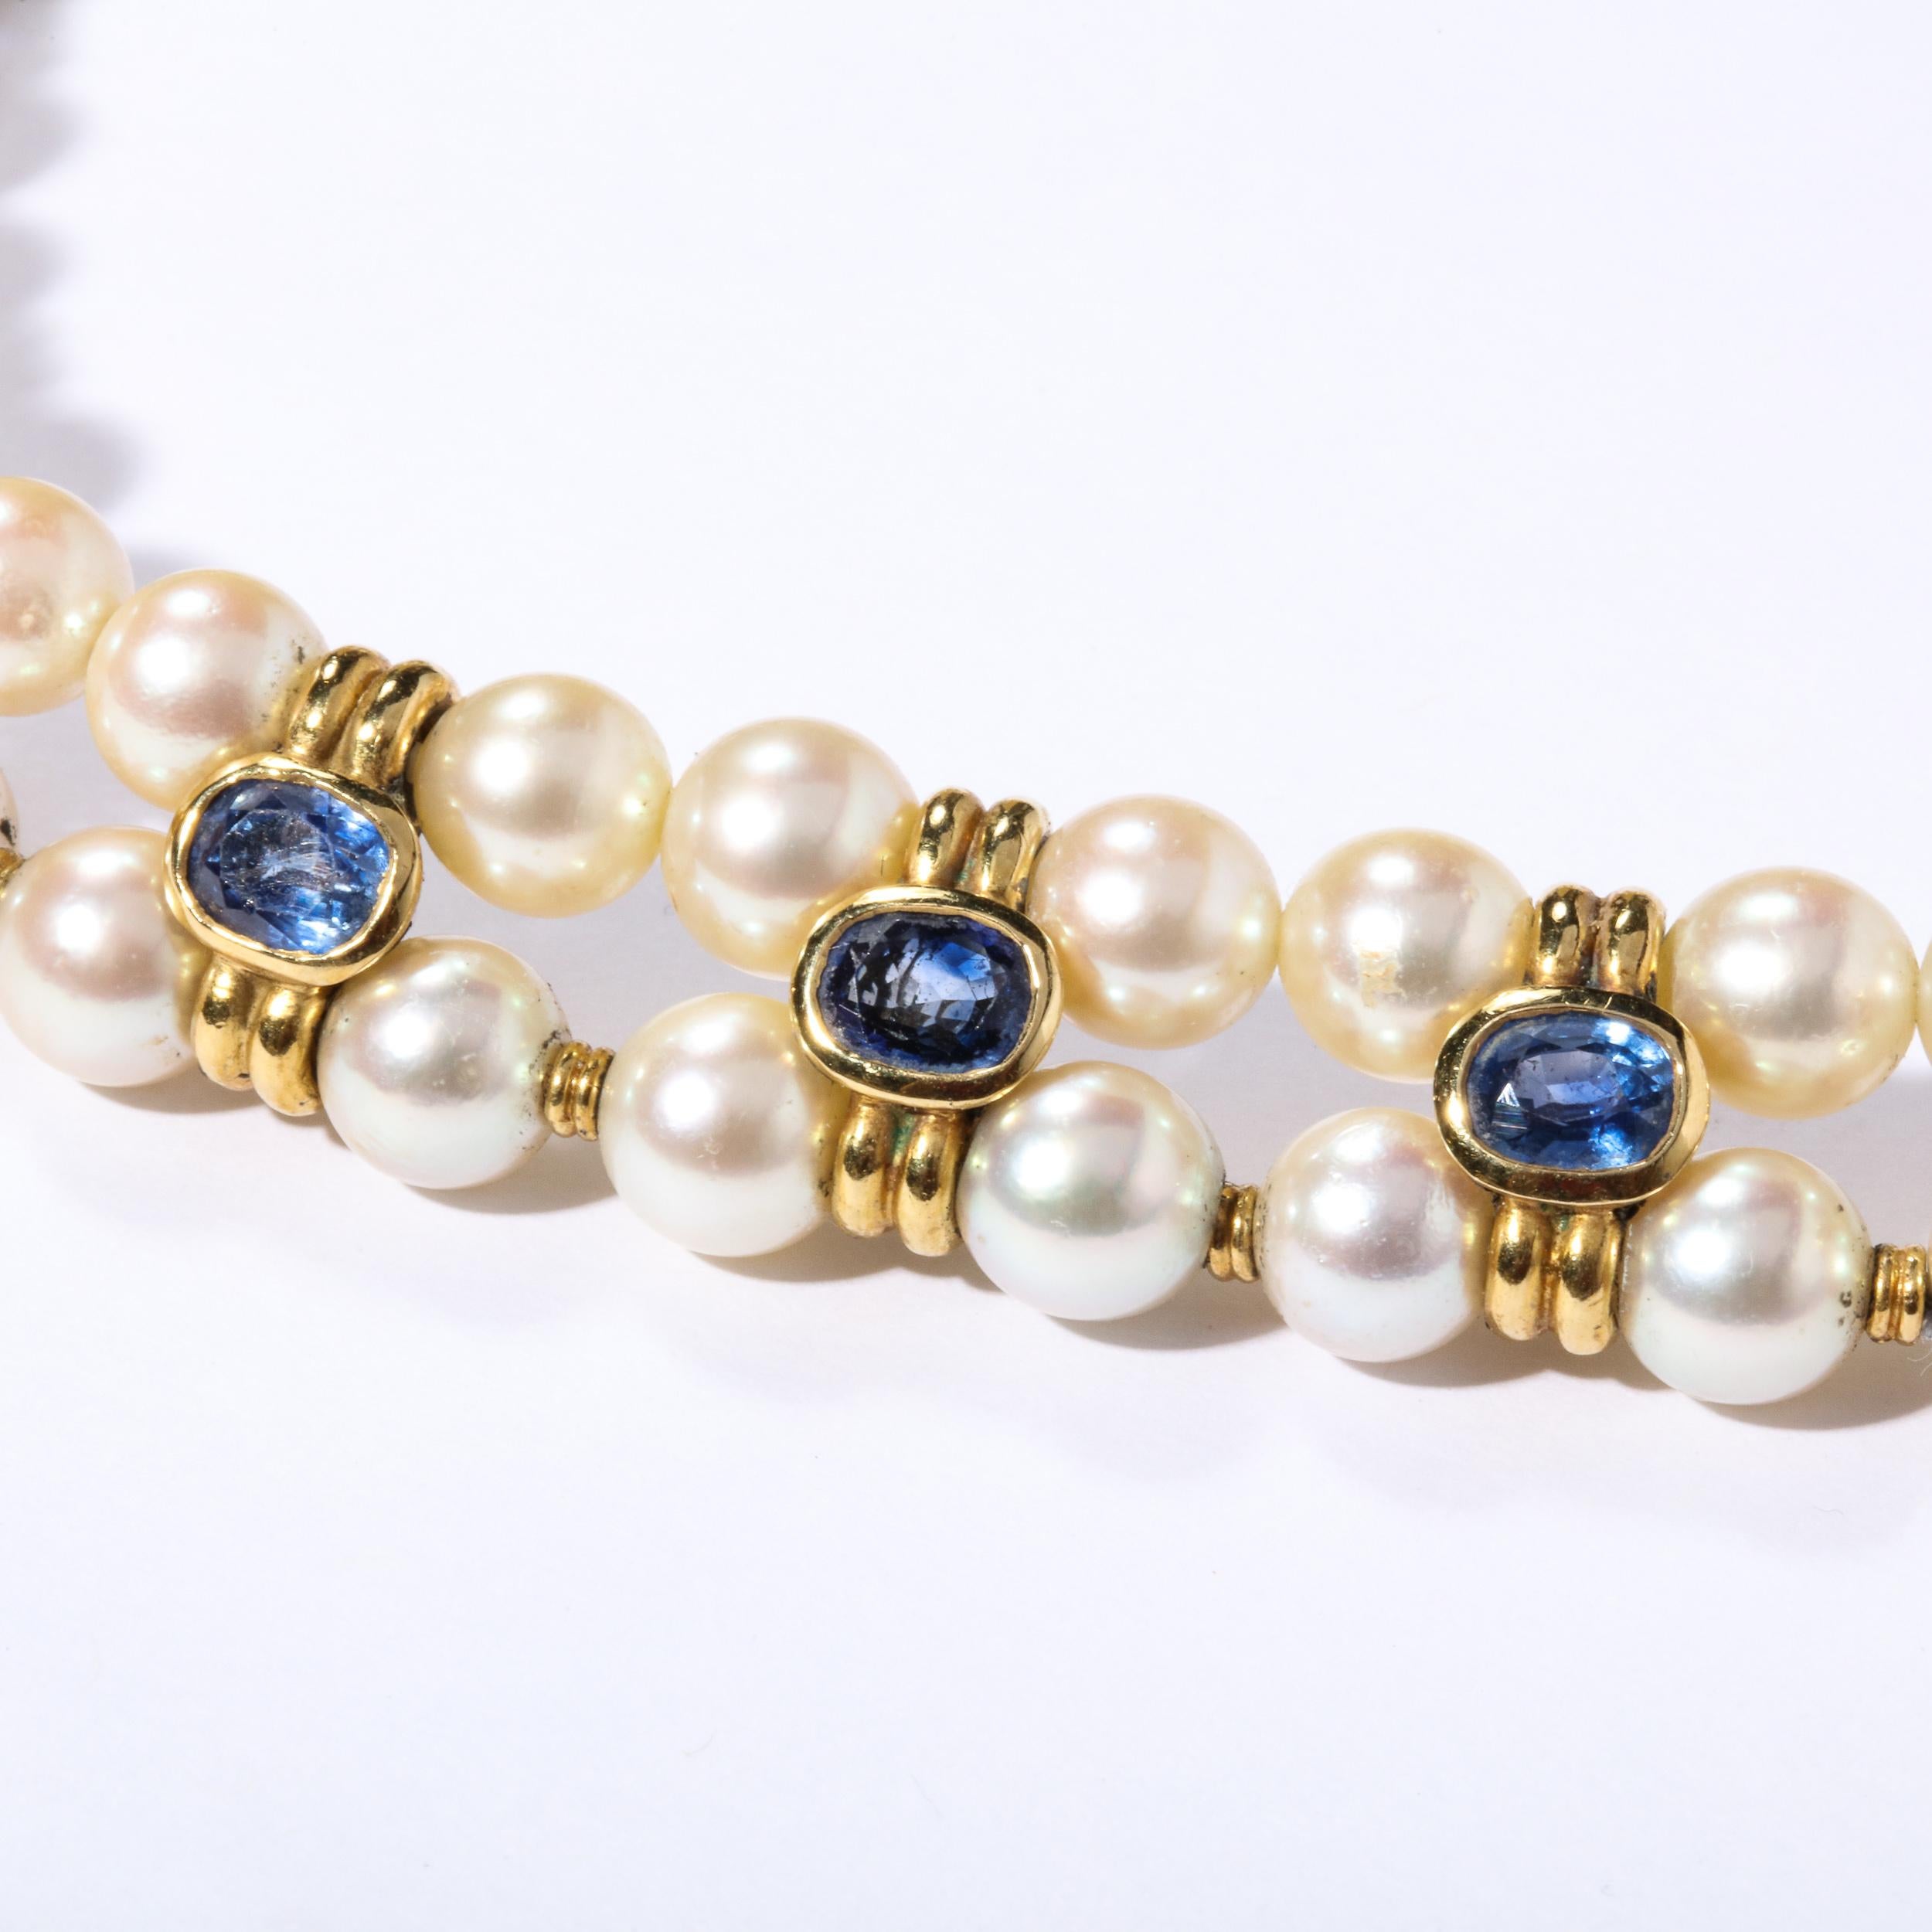 Double Strand Pearl Necklace  with Carved Citrine & Iolite, 18k and Diamonds  (Rundschliff) im Angebot